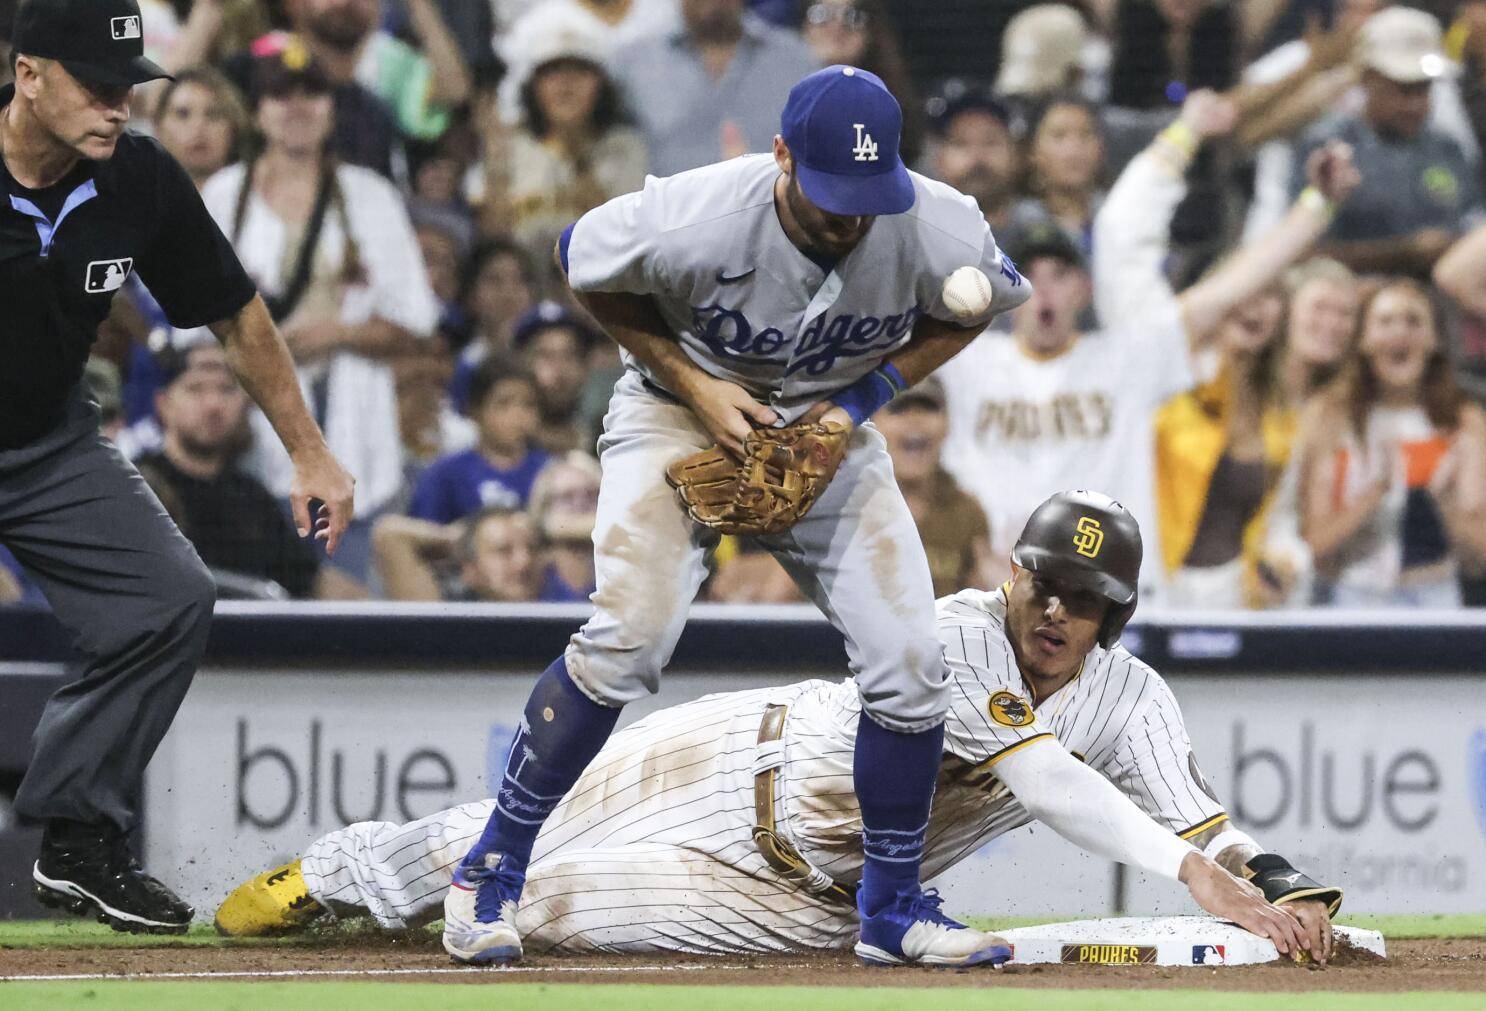 Manny Machado makes his Miller Park debut -- with the Dodgers